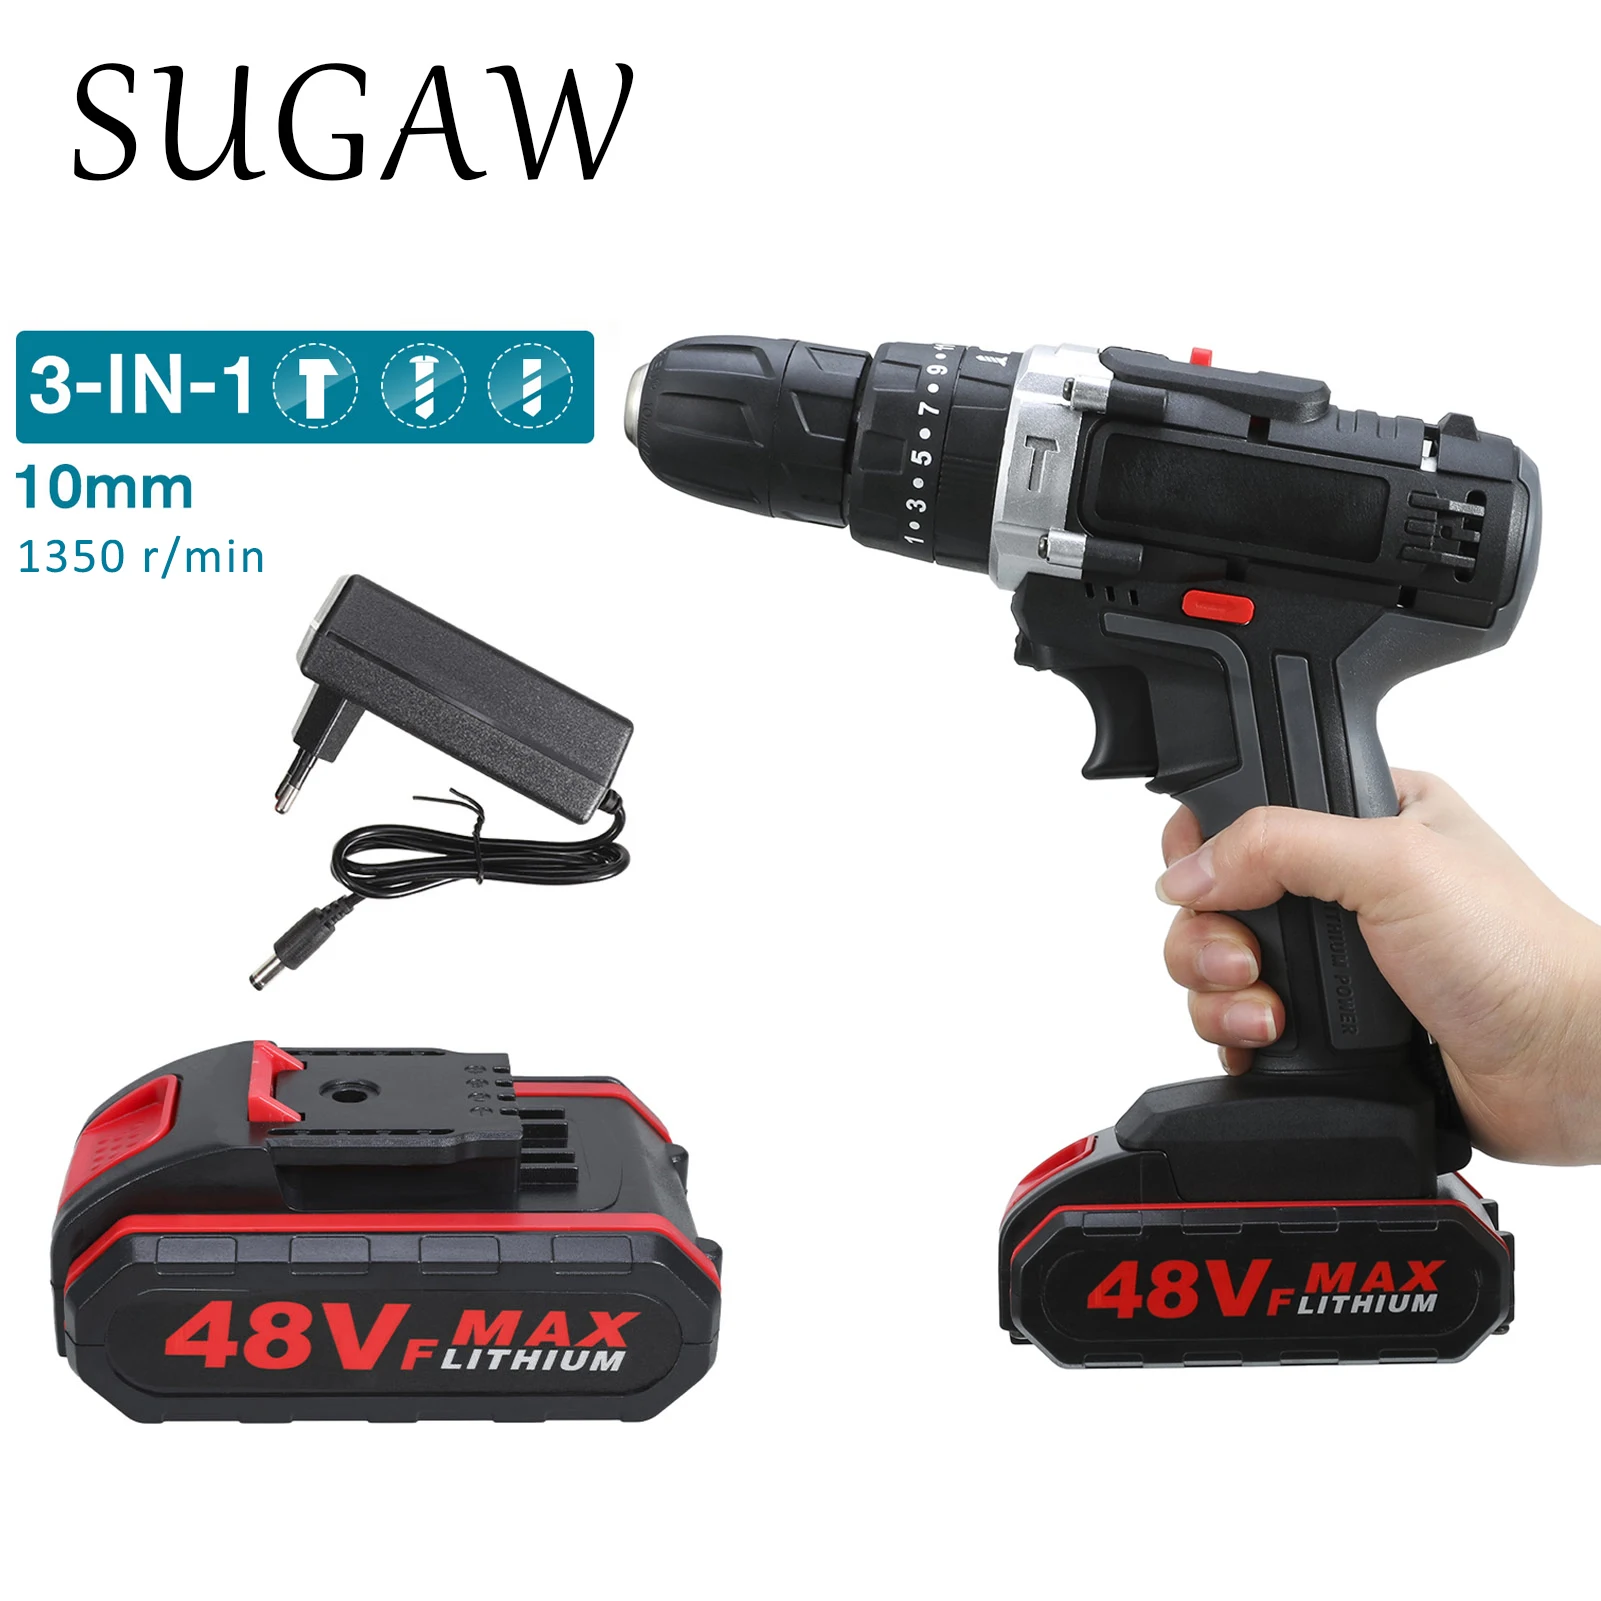 SUGAW 48V Electric Drill Impact Charging Cordless Screwdriver Lithium Battery Drill Mini Grinder Rotary Tools